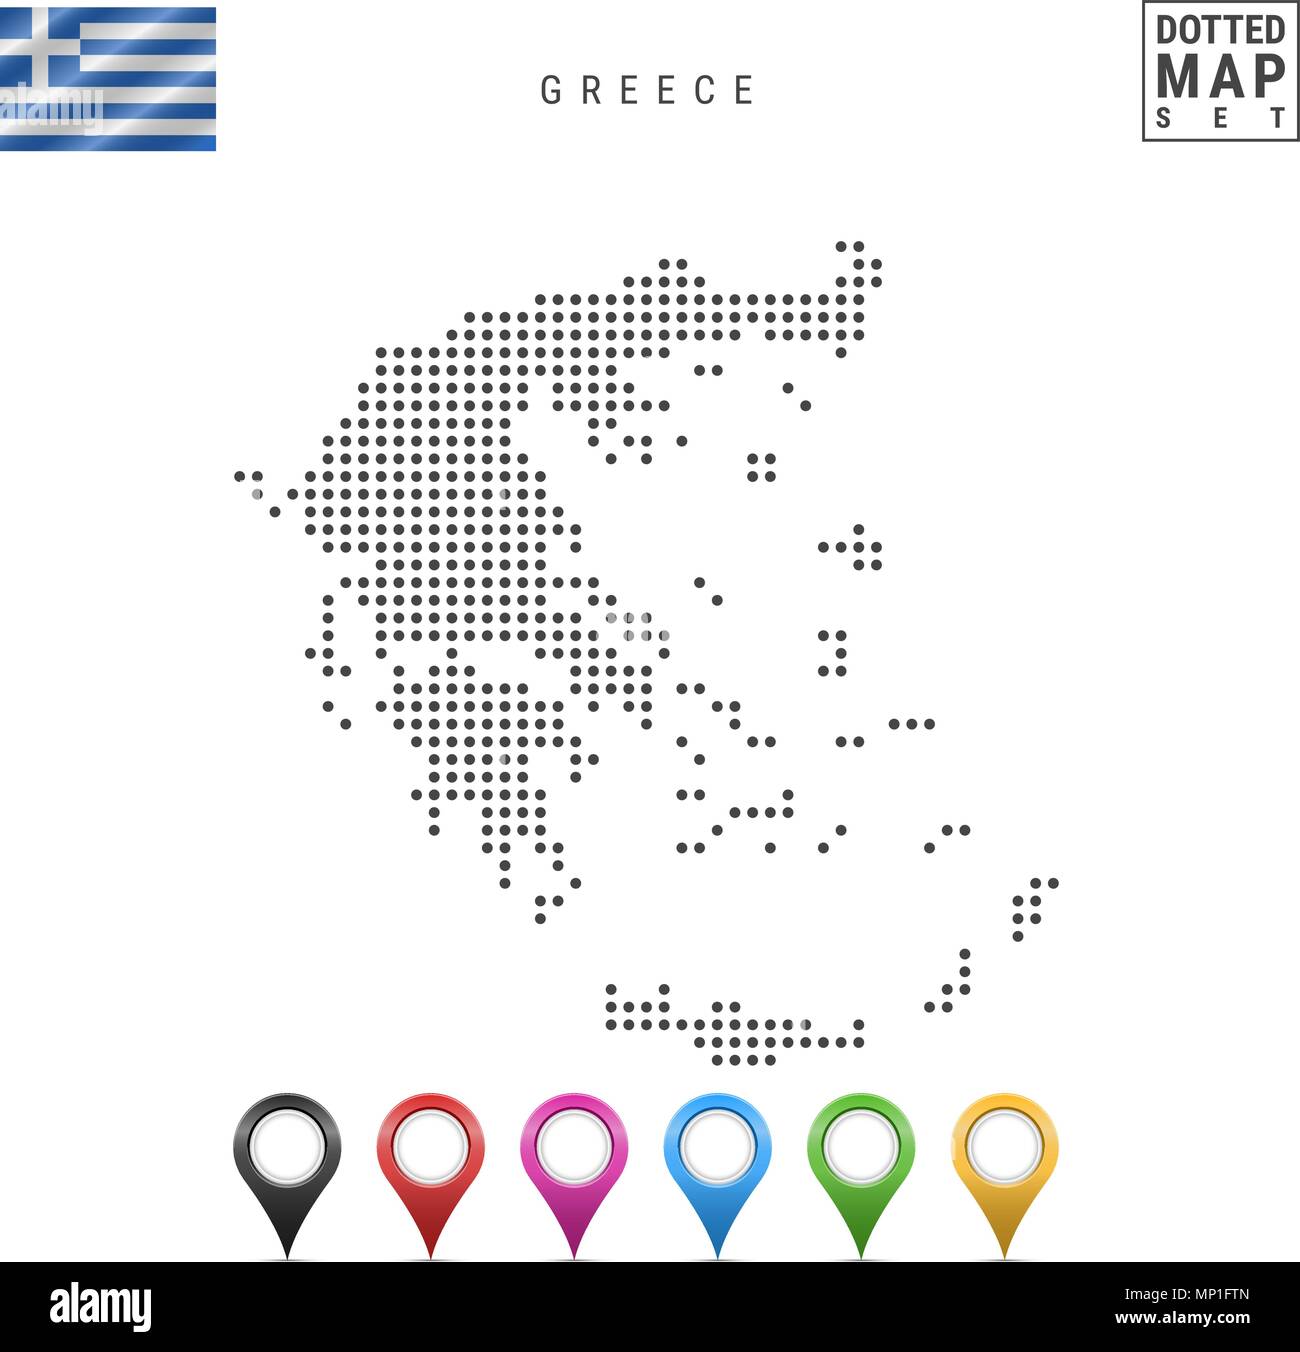 Vector Dotted Map of Greece. Simple Silhouette of Greece. The National Flag of Greece. Set of Multicolored Map Markers Stock Vector